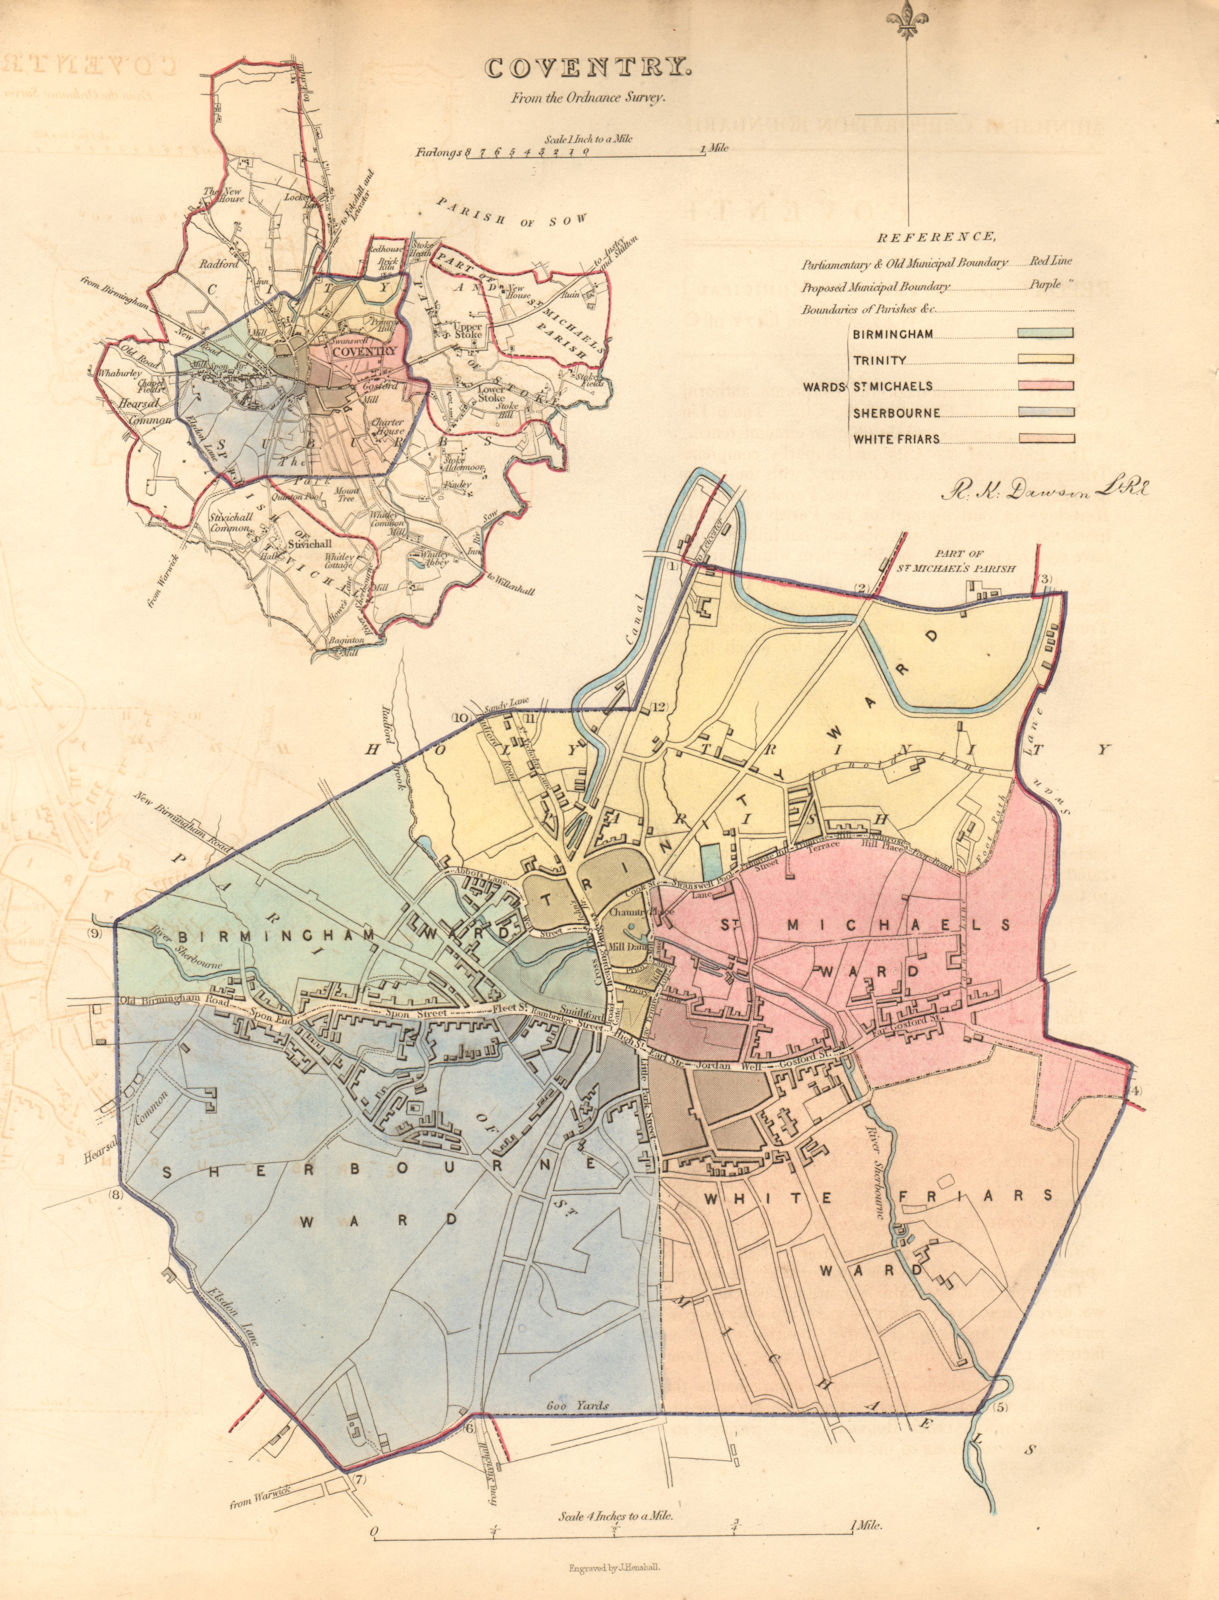 Associate Product COVENTRY borough/town/city plan BOUNDARY COMMISSION Warwickshire DAWSON 1837 map